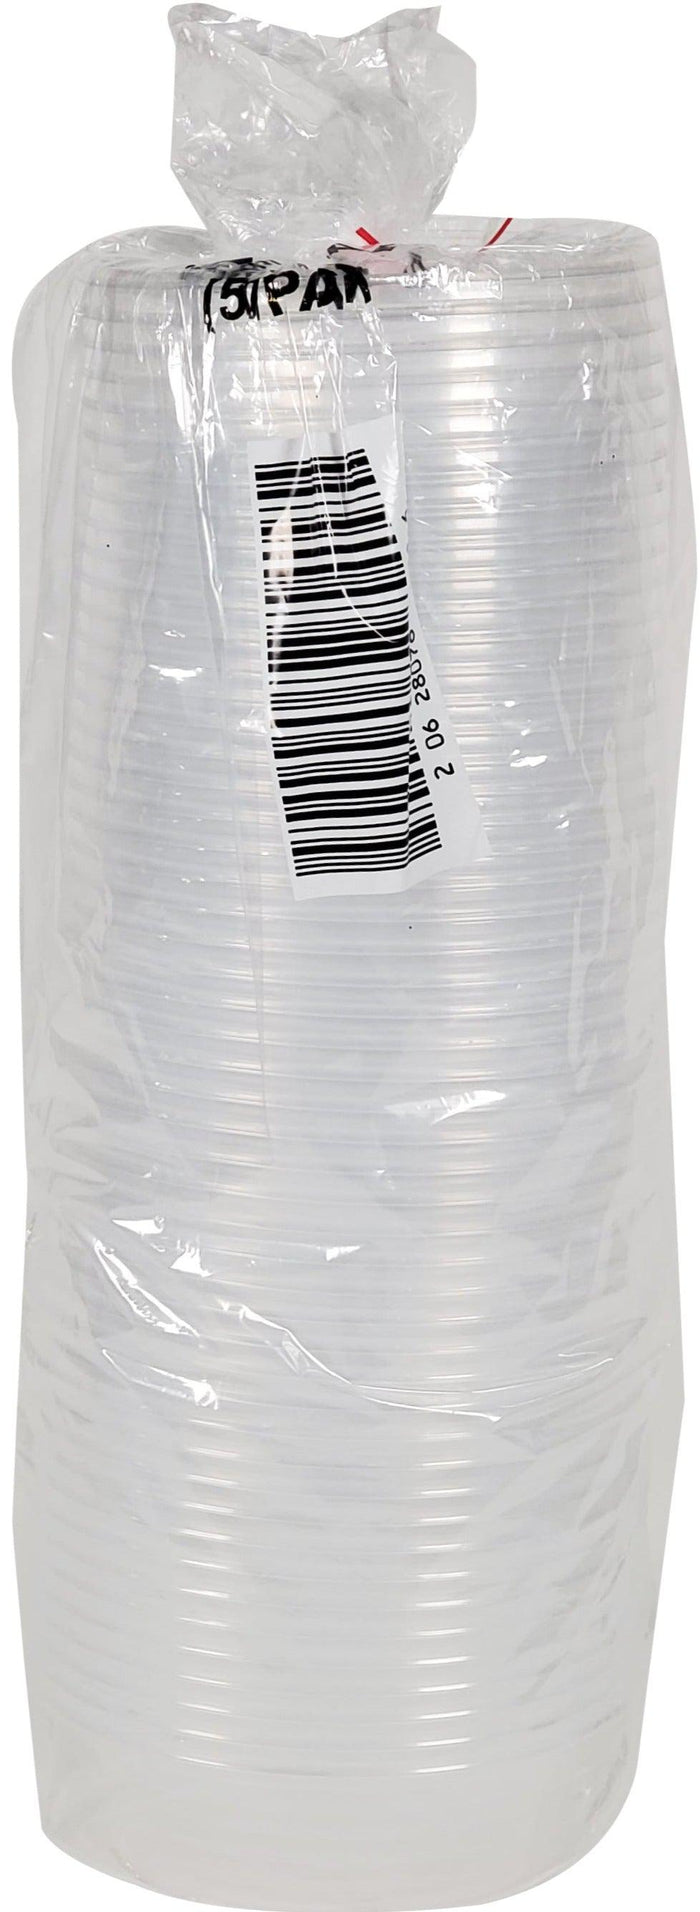 https://www.a1cashandcarry.com/cdn/shop/products/Hoffmann-Deli-Container-Clear-8oz-Packaging-Hoffmann-Hoffmann-Deli-Container-Clear-8oz-Packaging-Hoffmann-Hoffmann-Deli-Container-Clear-8oz-Packaging-Hoffmann-Hoffmann-Deli-Container_700x.jpg?v=1697941700